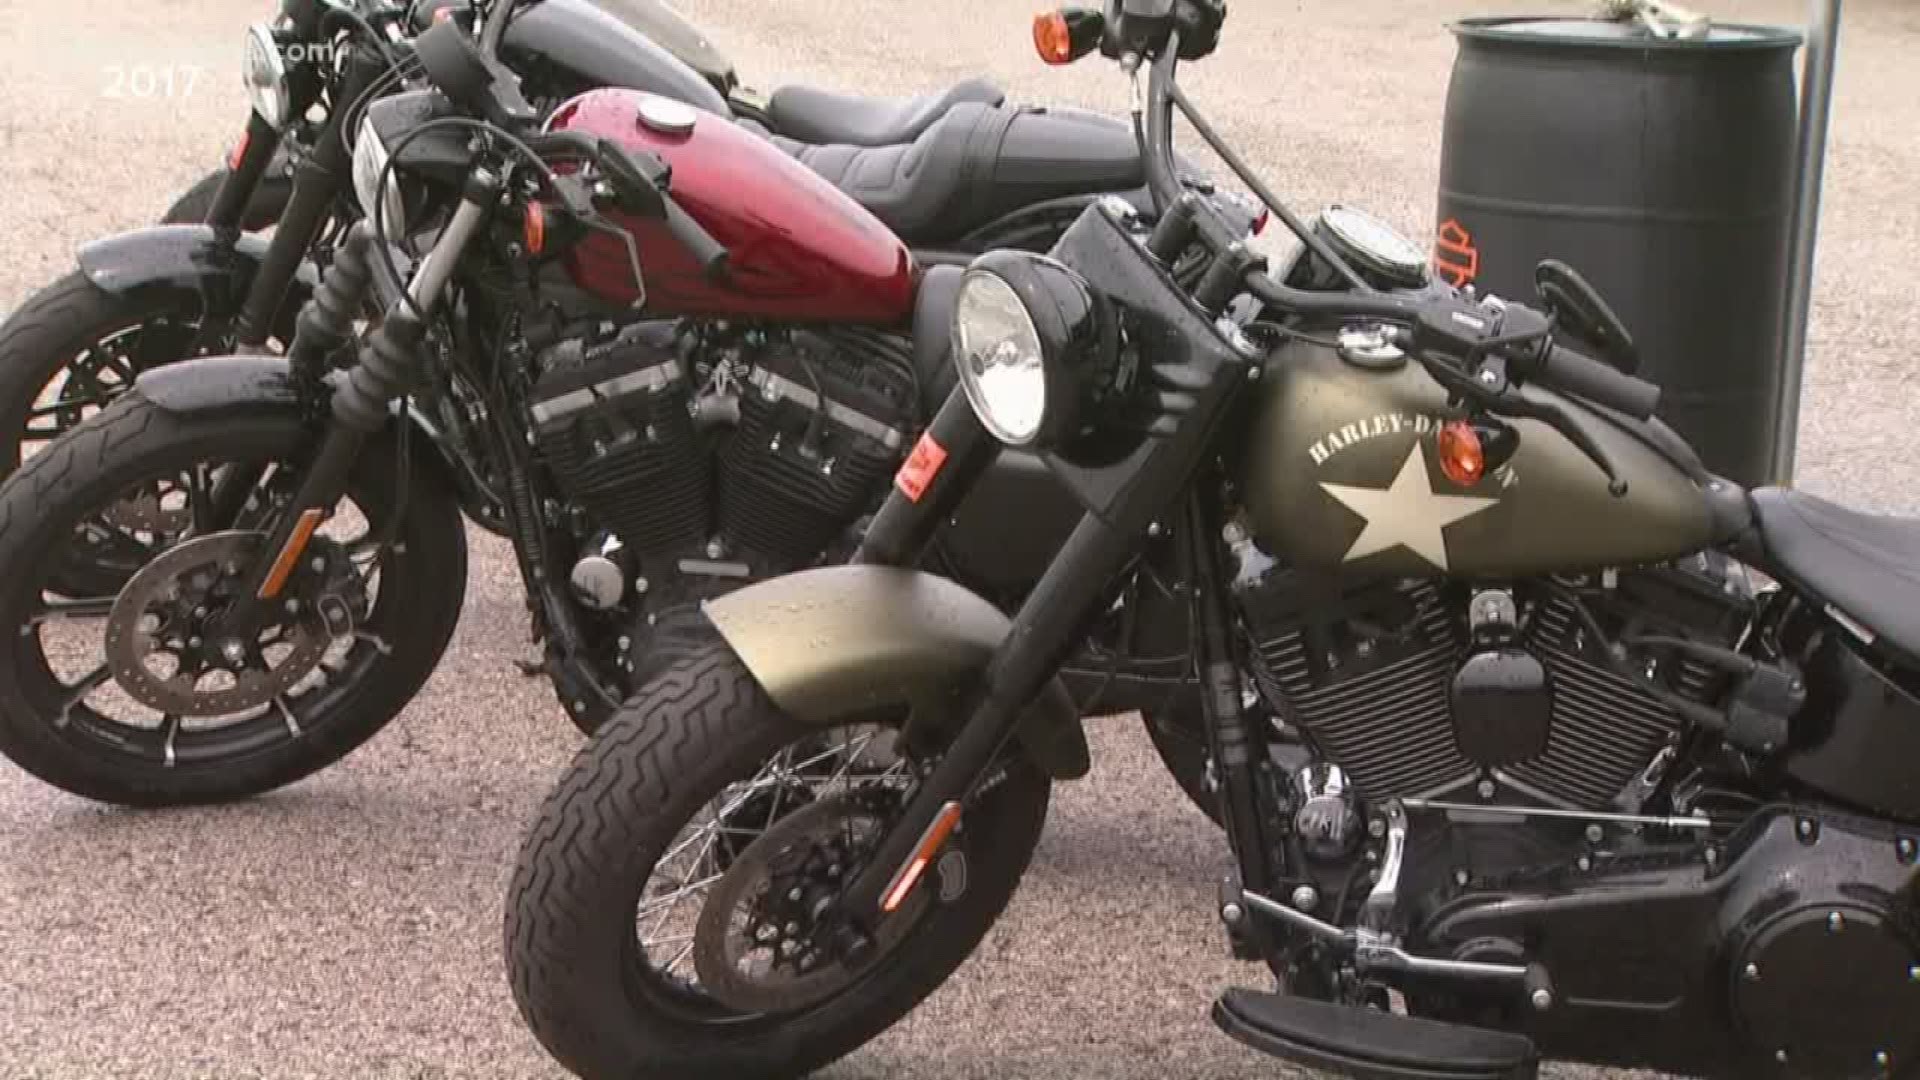 It's the 13th year for Muskegon's Bike Time, which will bring out thousands of motorcycles to the lakeshore. There will be cornhole tournaments, bikini and dad bod contests and on-site camping.  13 ON YOUR SIDE's Angela Cunningham was live in Muskegon with organizers to hear all about it.